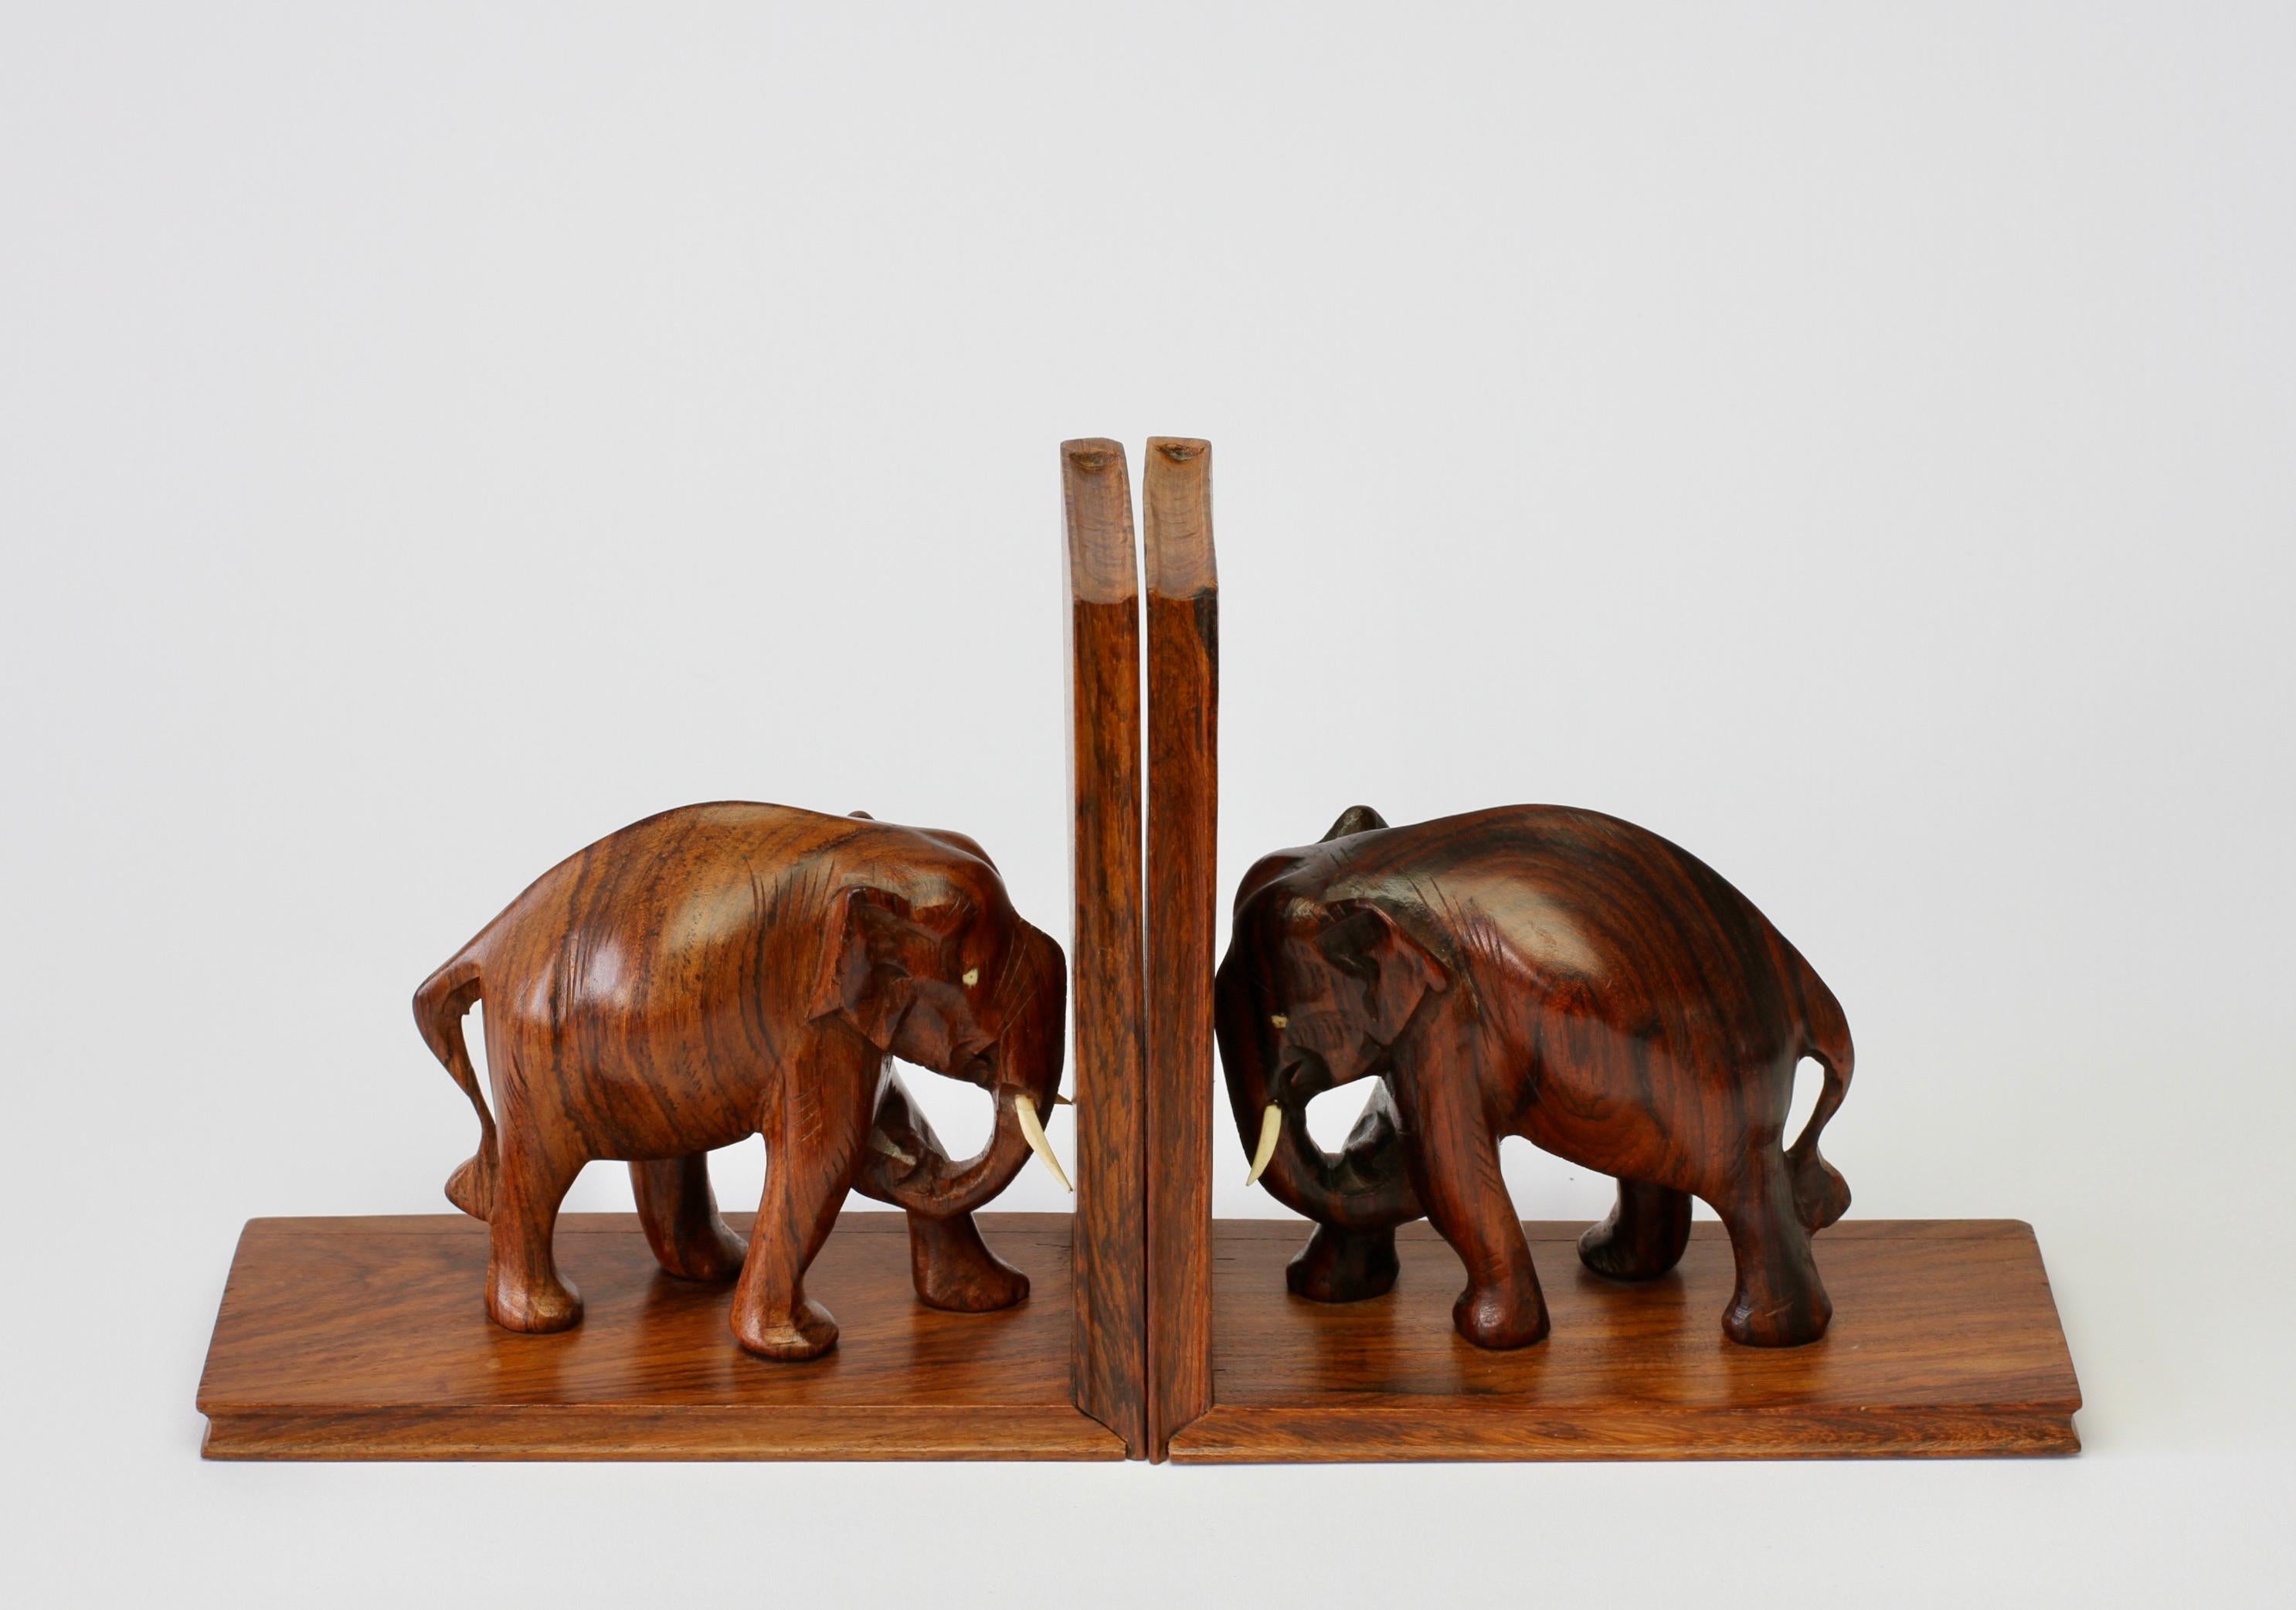 Mid-Century Modern Hand Carved Wooden Book Ends with Elephant Sculptures / Figures, circa 1960s